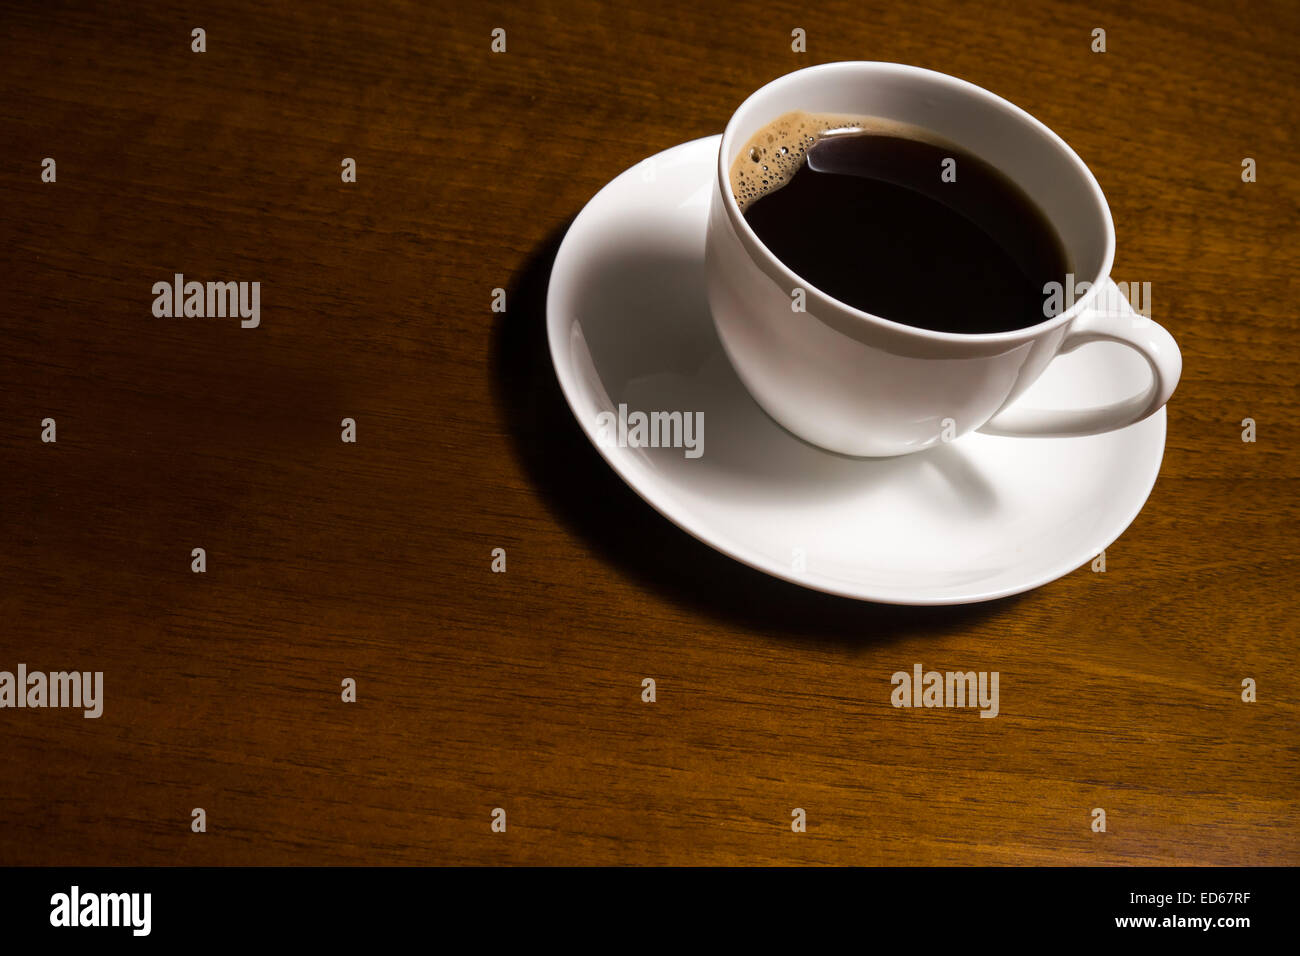 cup of coffee on table Stock Photo